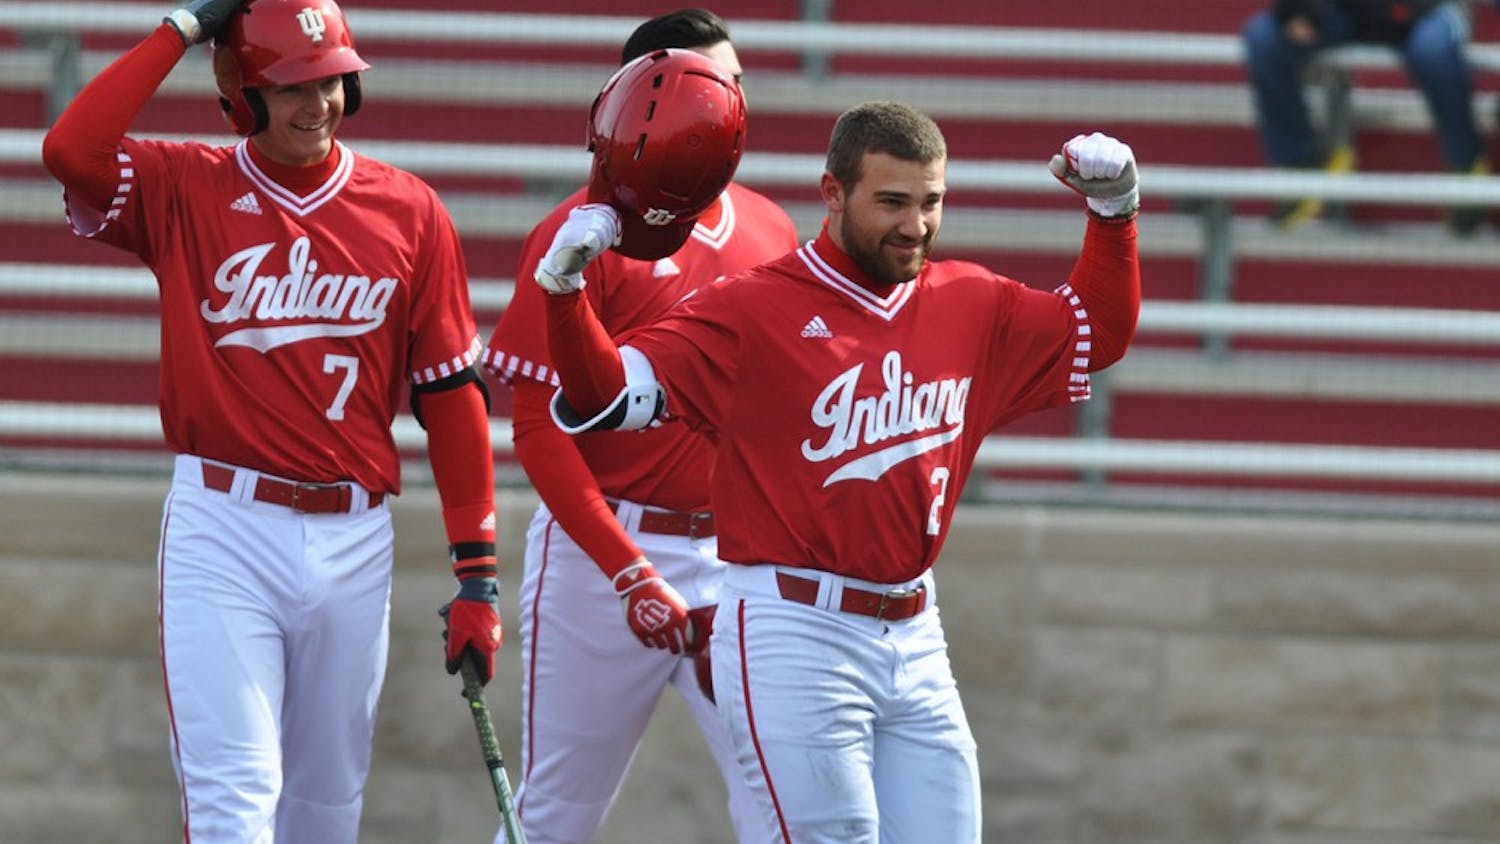 Senior Alex Krupa returns to the dugout after his first career home run on Saturday at Bart Kaufman Field. Krupa’s solo home run led off a 7-run third inning for the Hoosiers, who went on to beat Middle Tennessee 12-1.